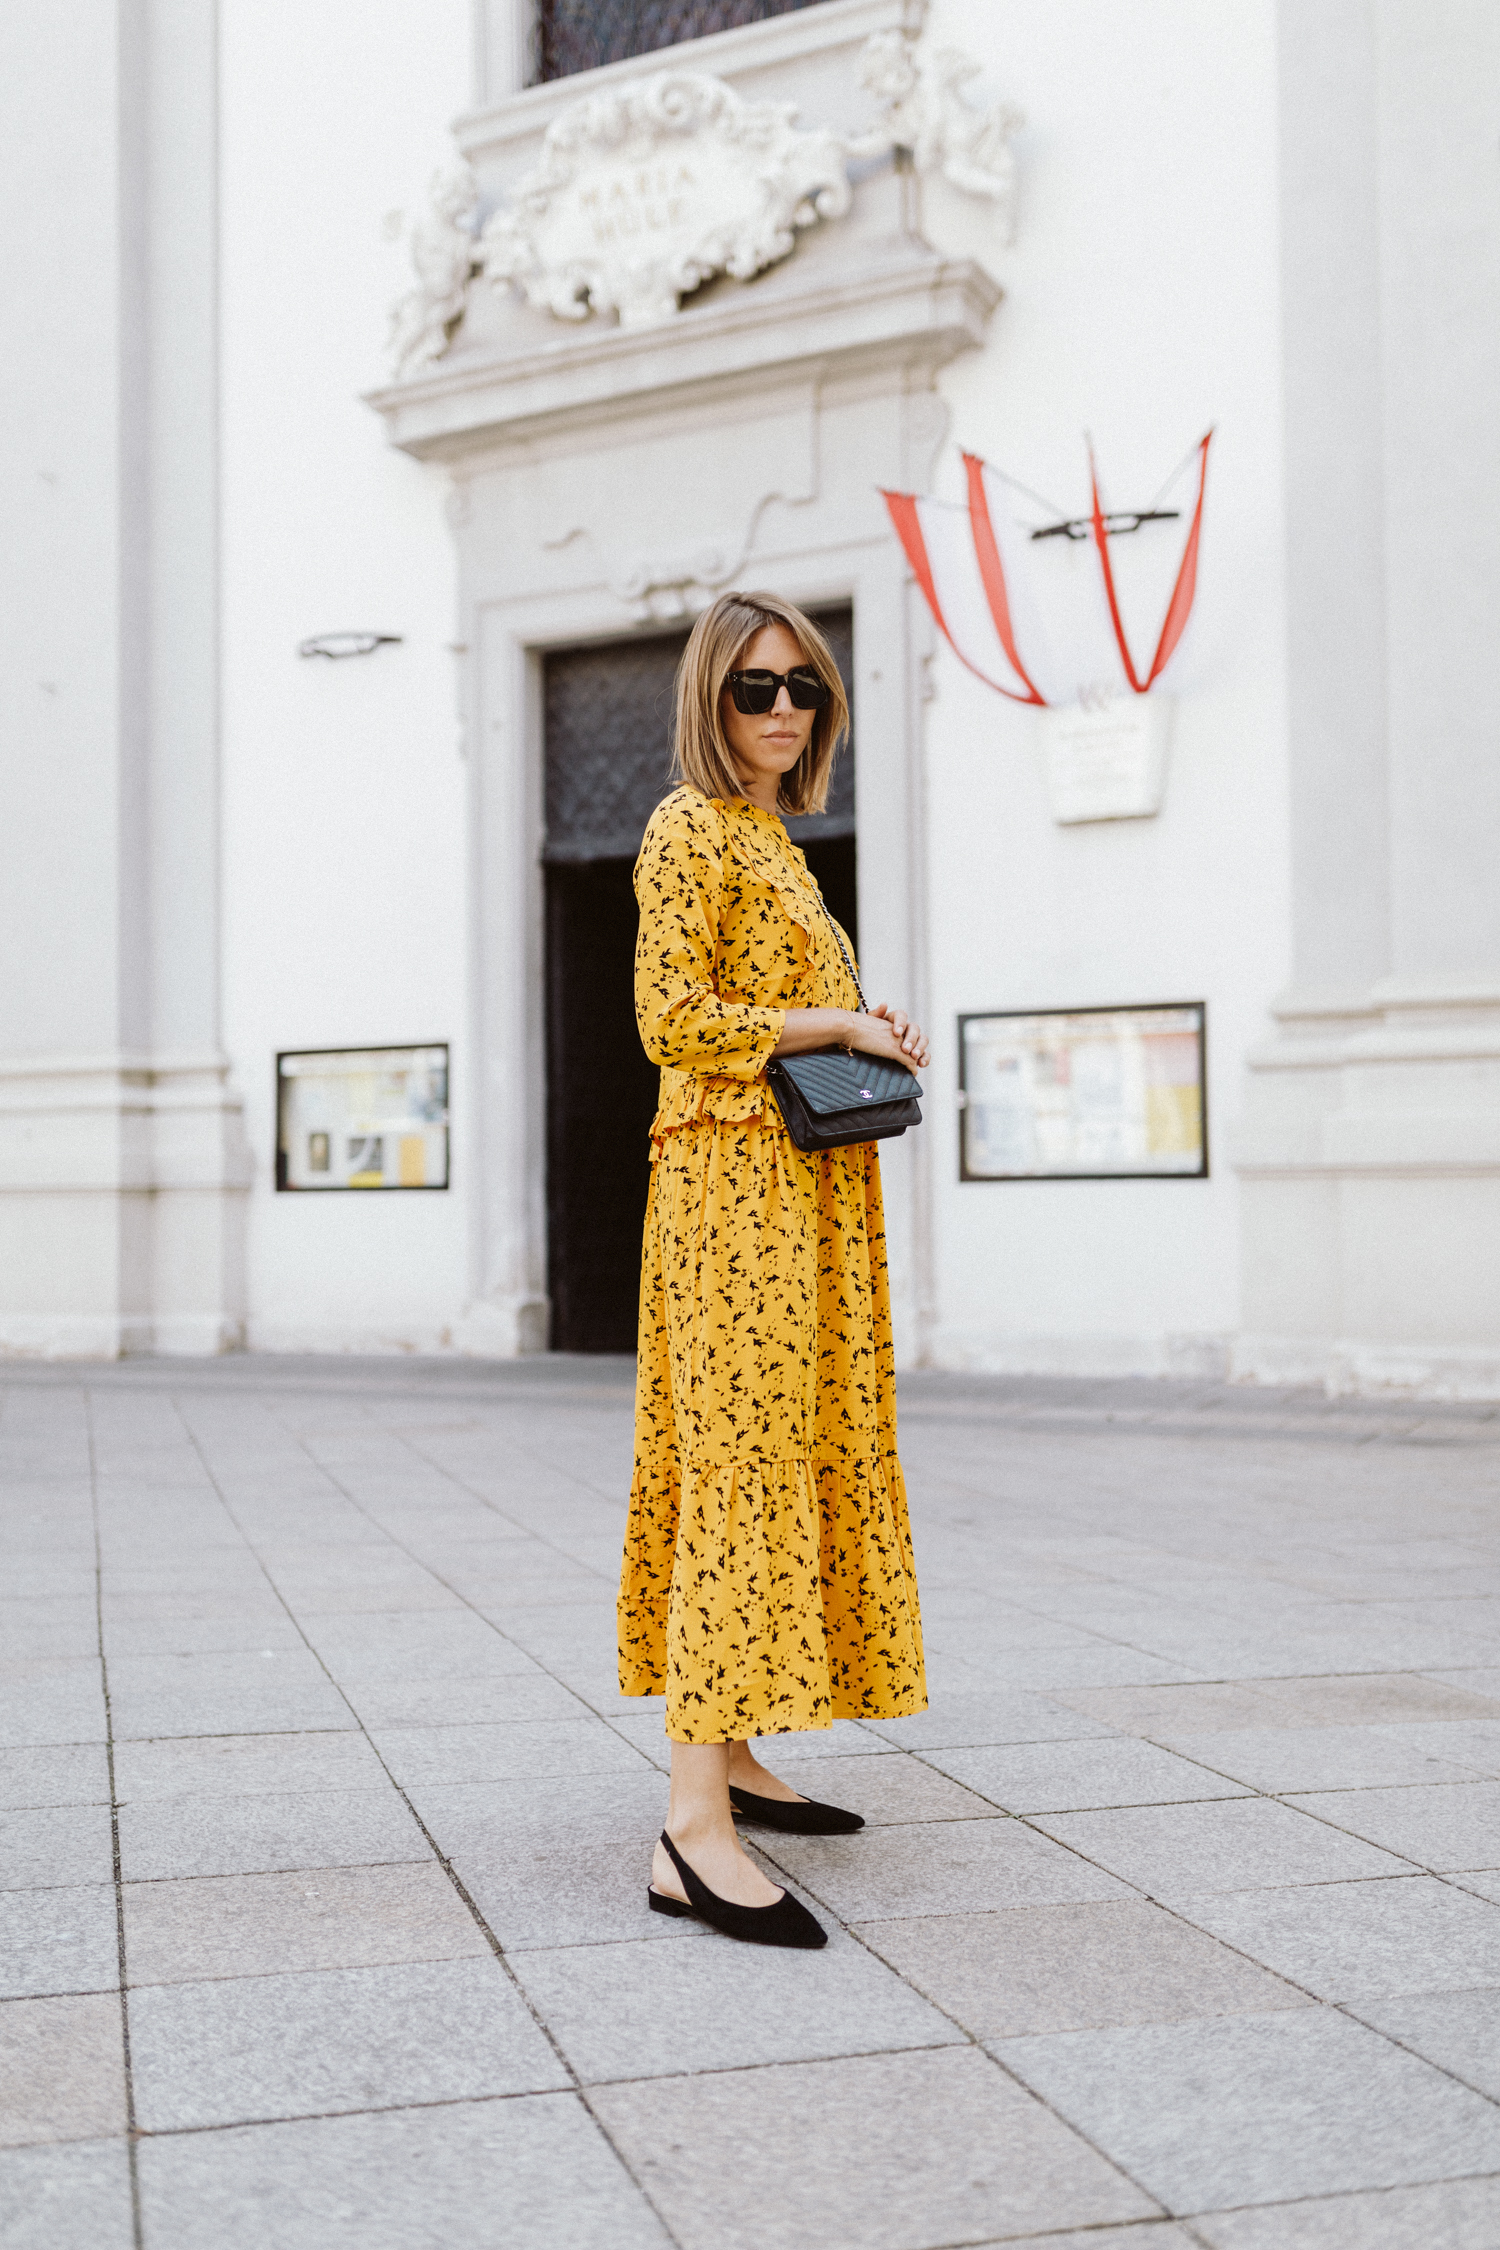 Florals for Fall: Yellow Florals | Love Daily Dose